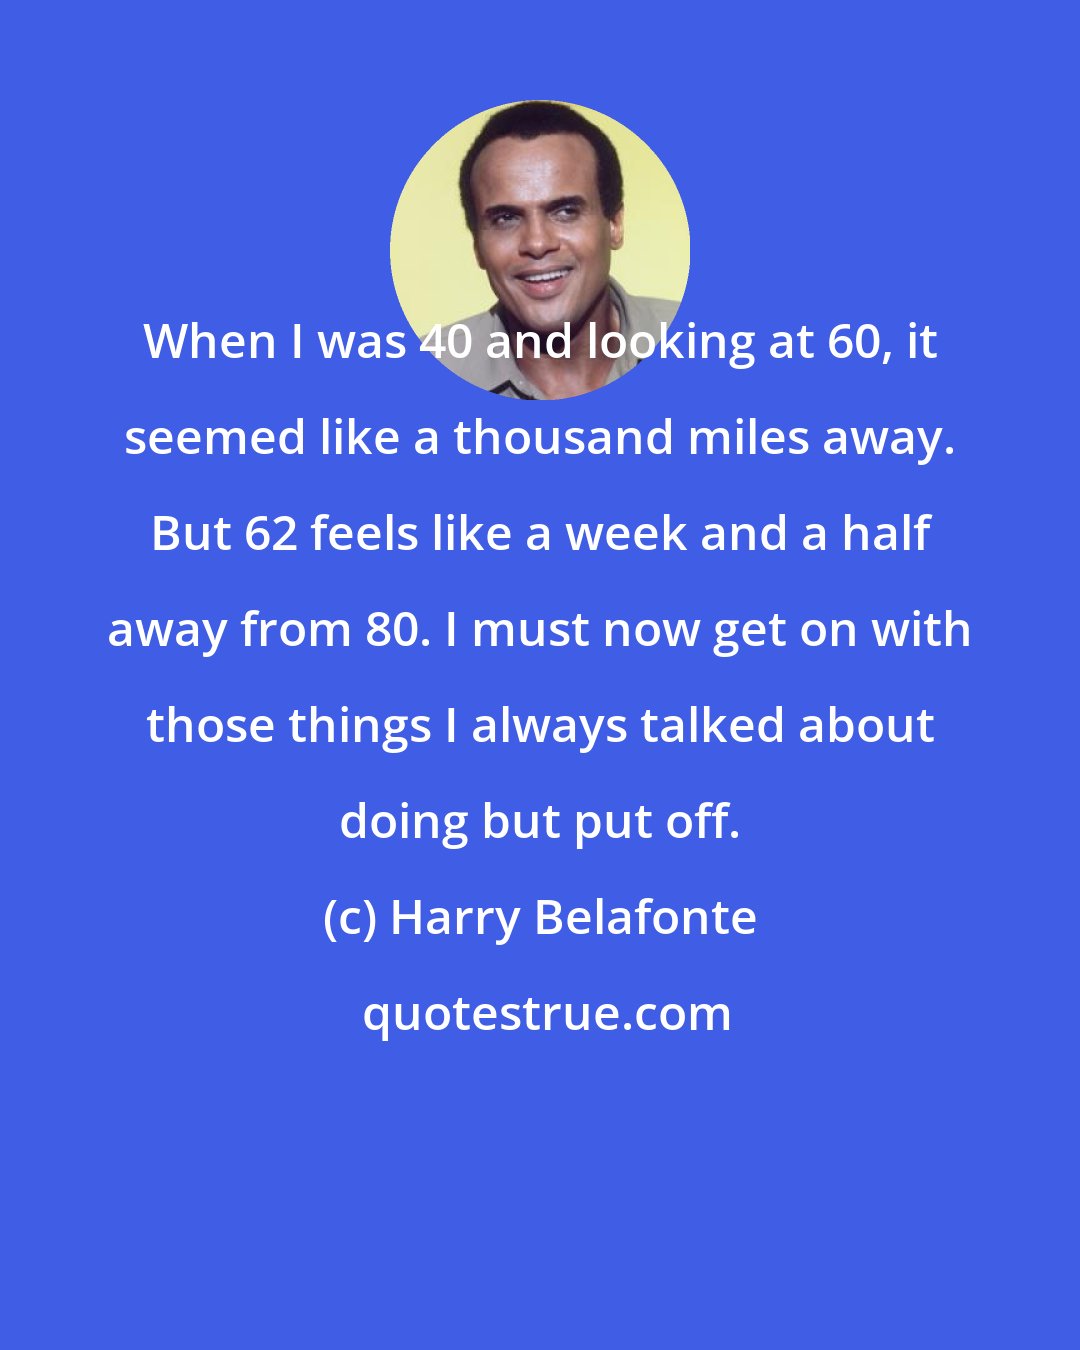 Harry Belafonte: When I was 40 and looking at 60, it seemed like a thousand miles away. But 62 feels like a week and a half away from 80. I must now get on with those things I always talked about doing but put off.